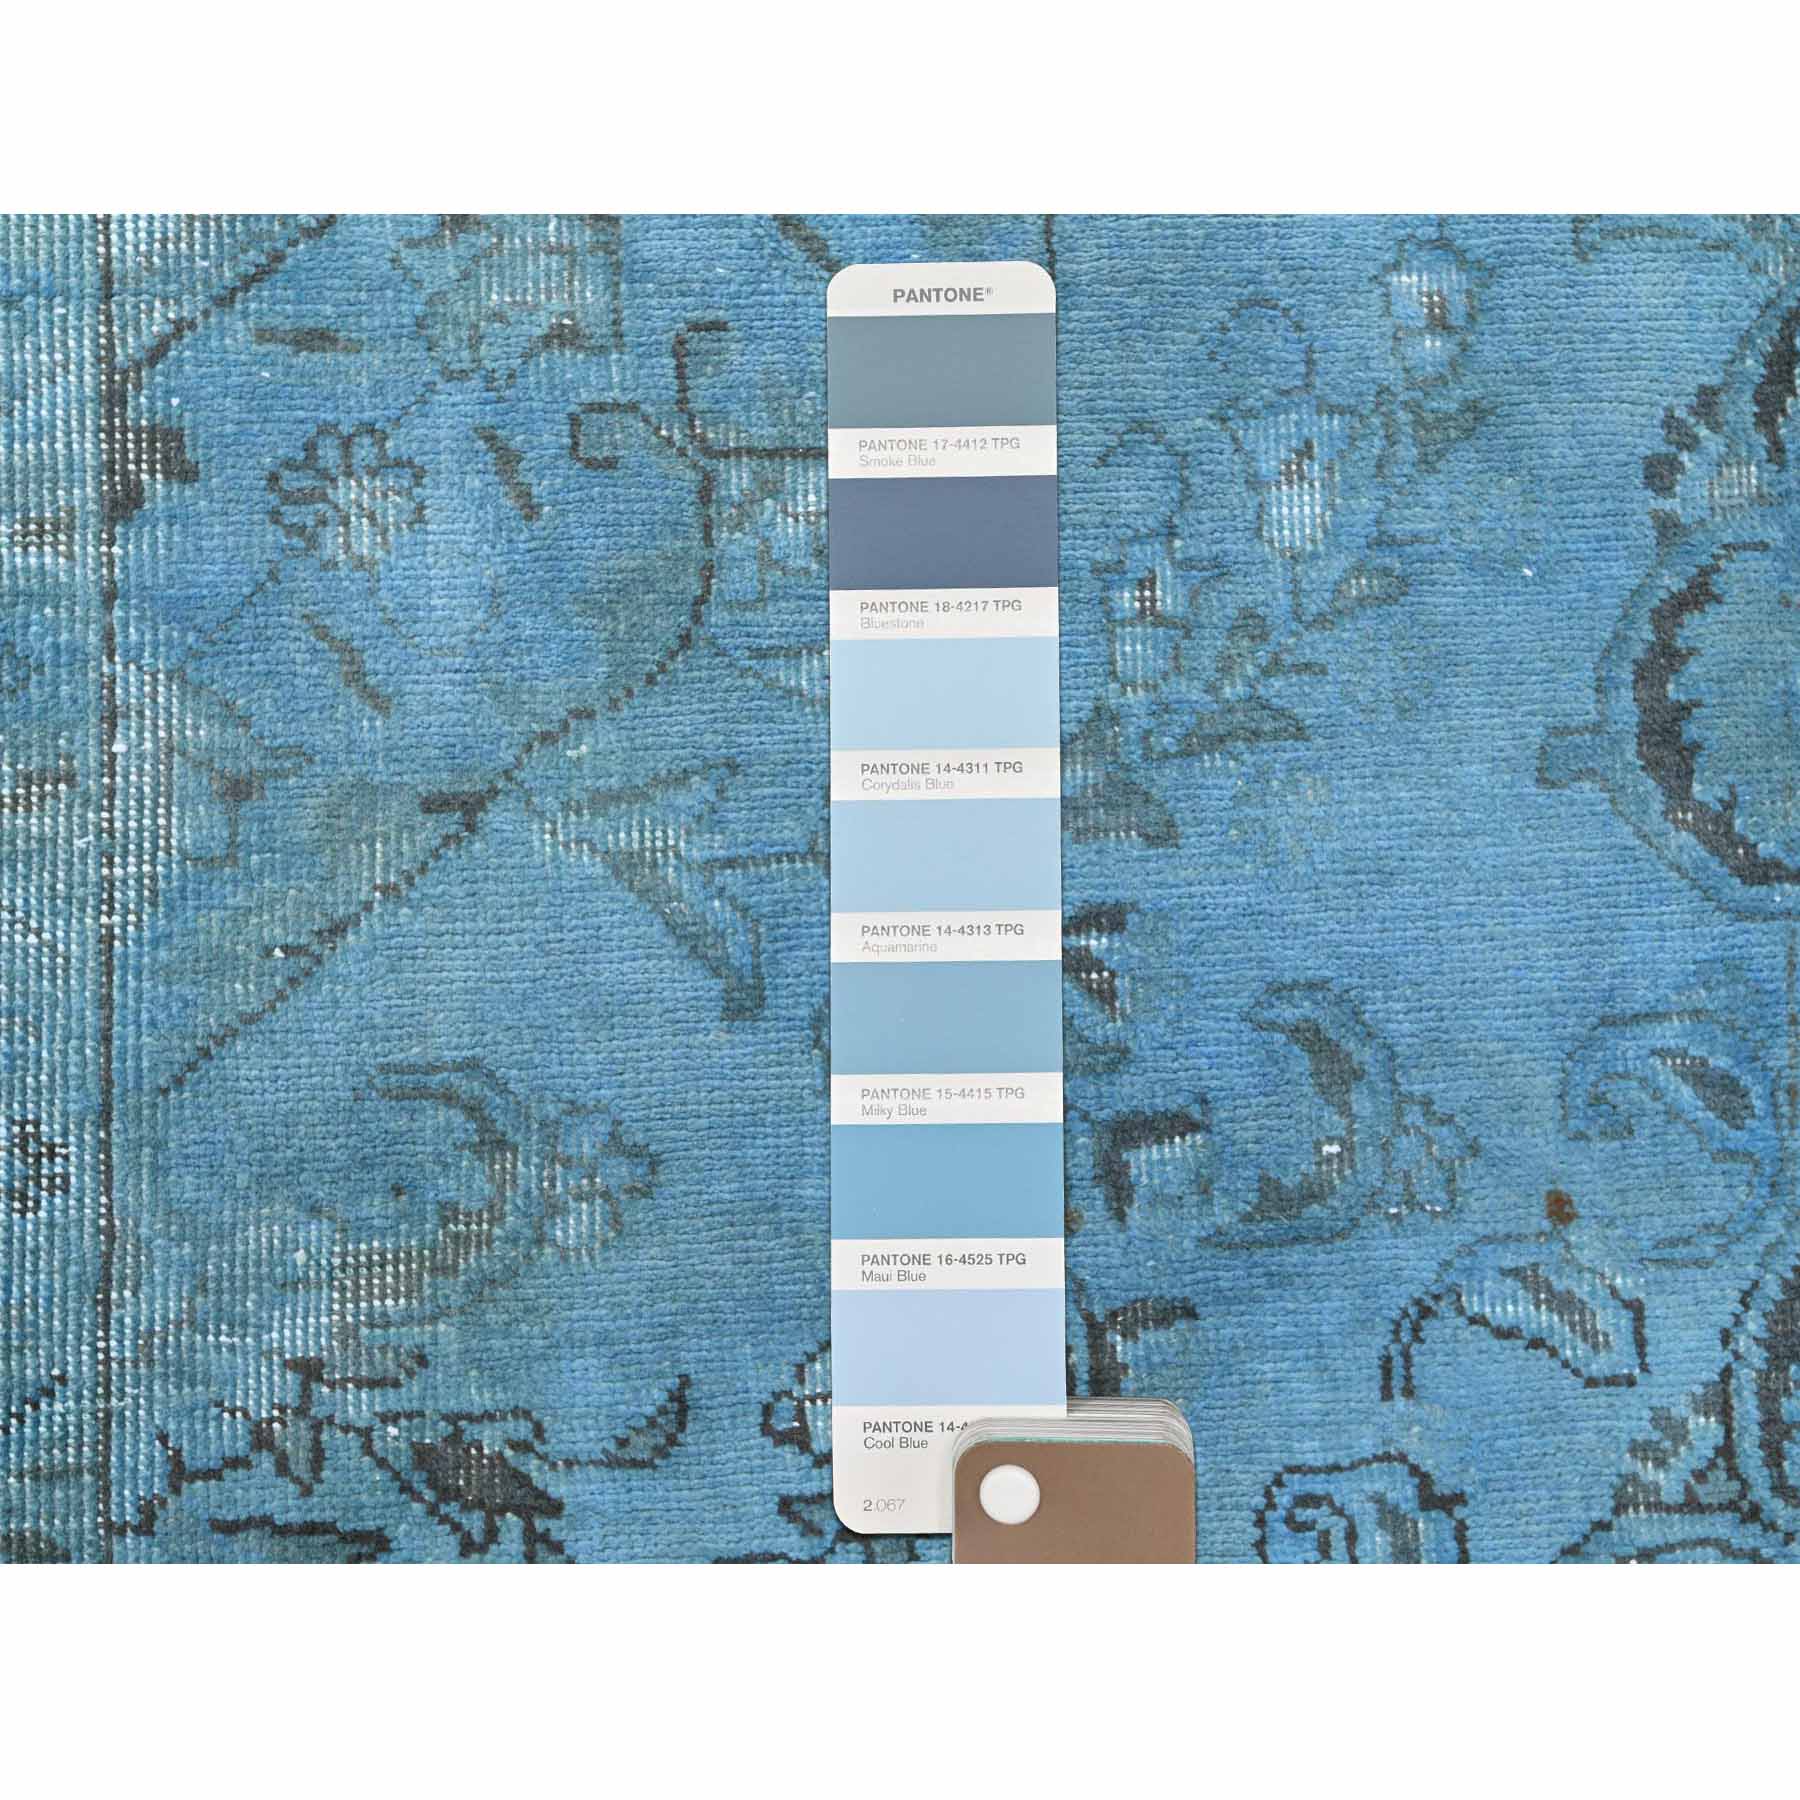 Overdyed-Vintage-Hand-Knotted-Rug-308090